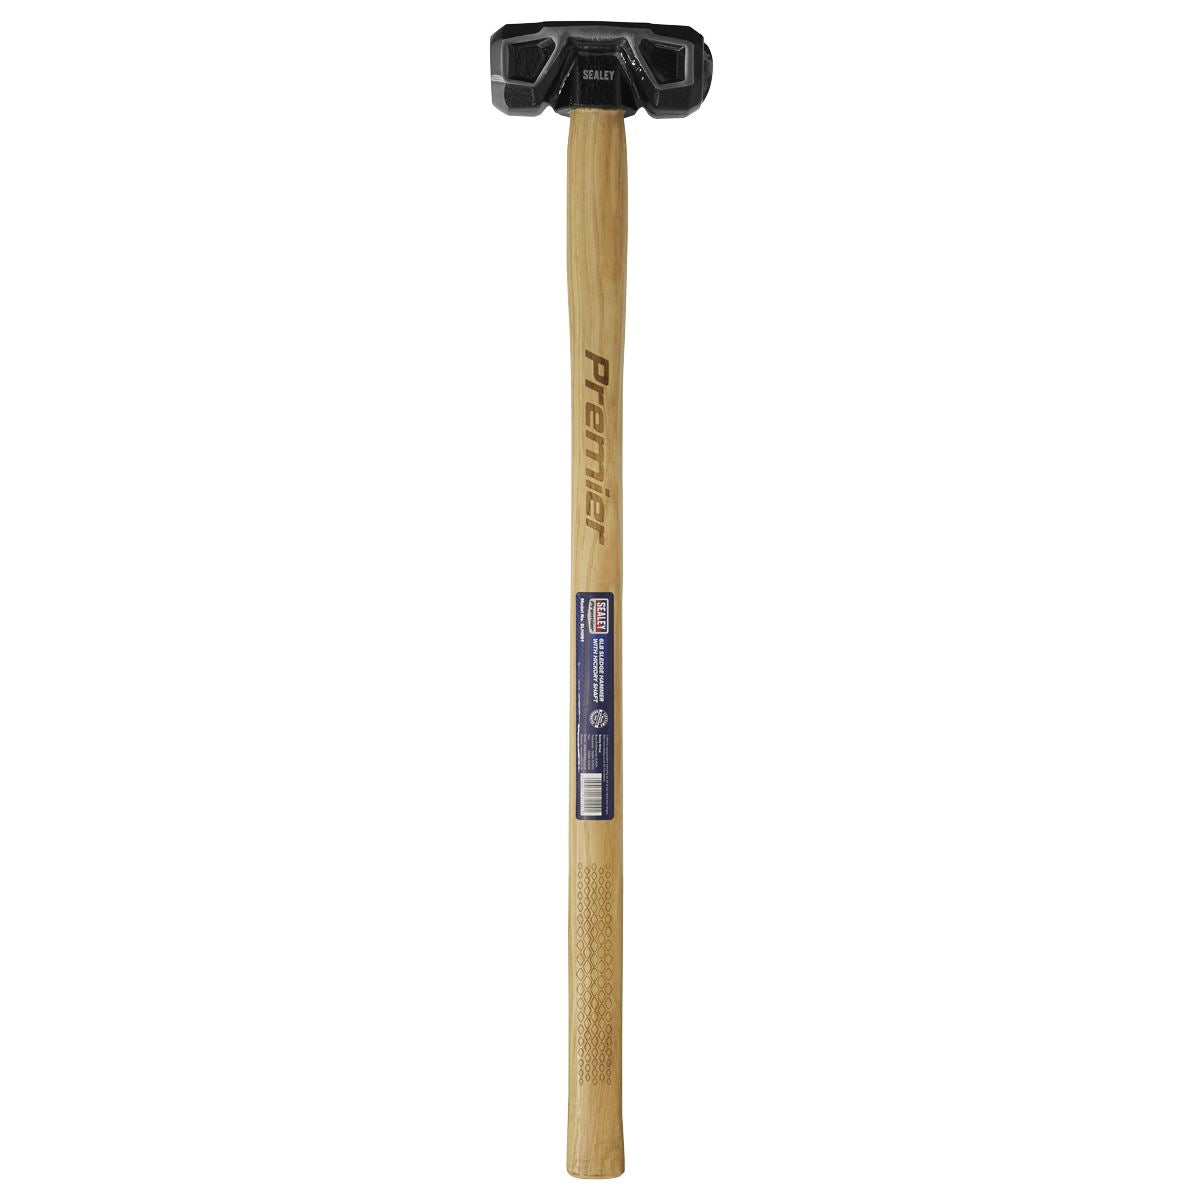 Sealey Sledge Hammer 6lb with Hickory Shaft Premier